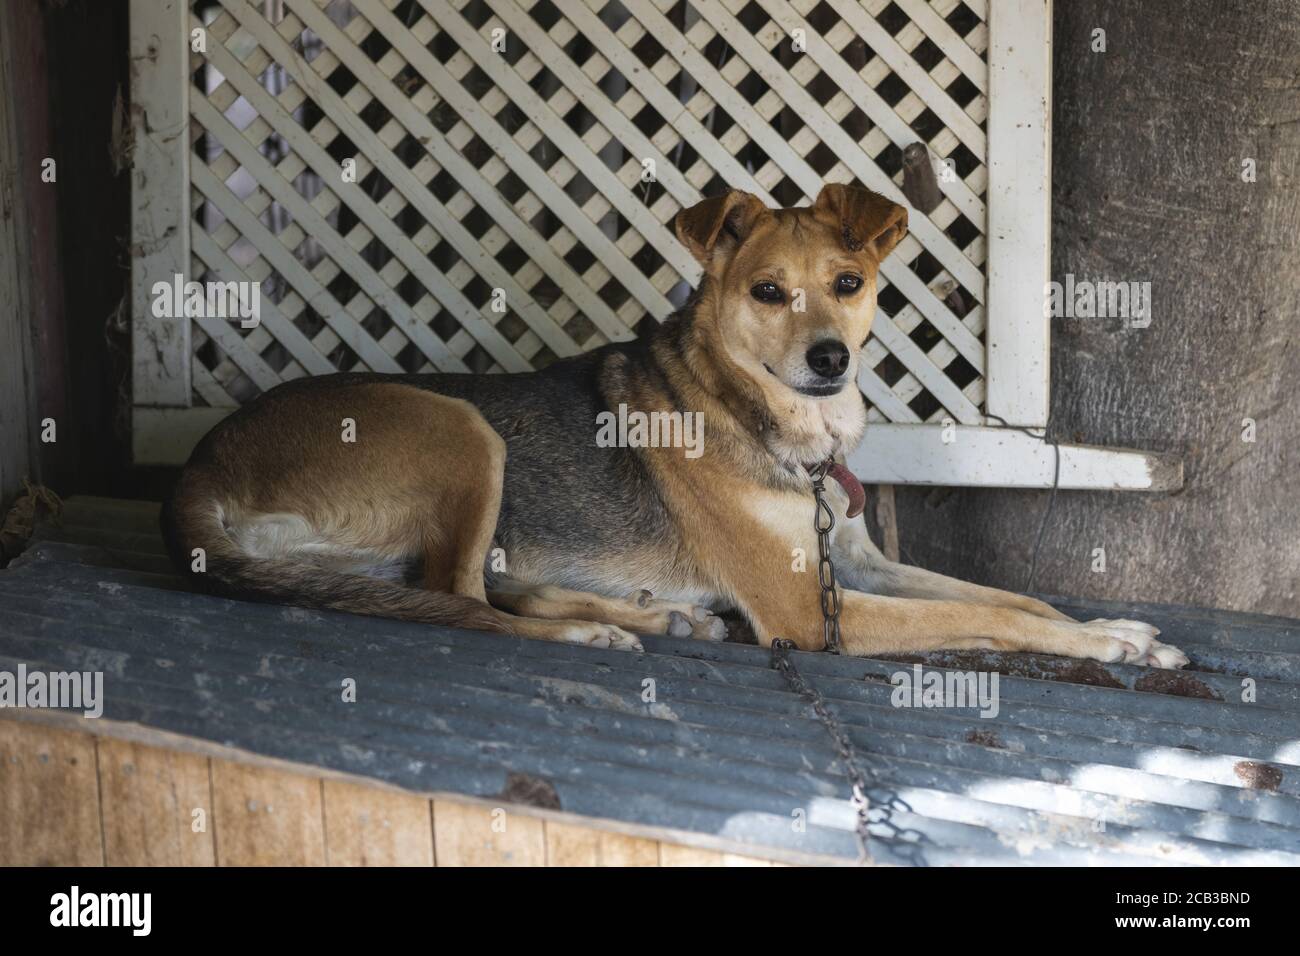 Cute brown dog sitting on the ground with a chain Stock Photo